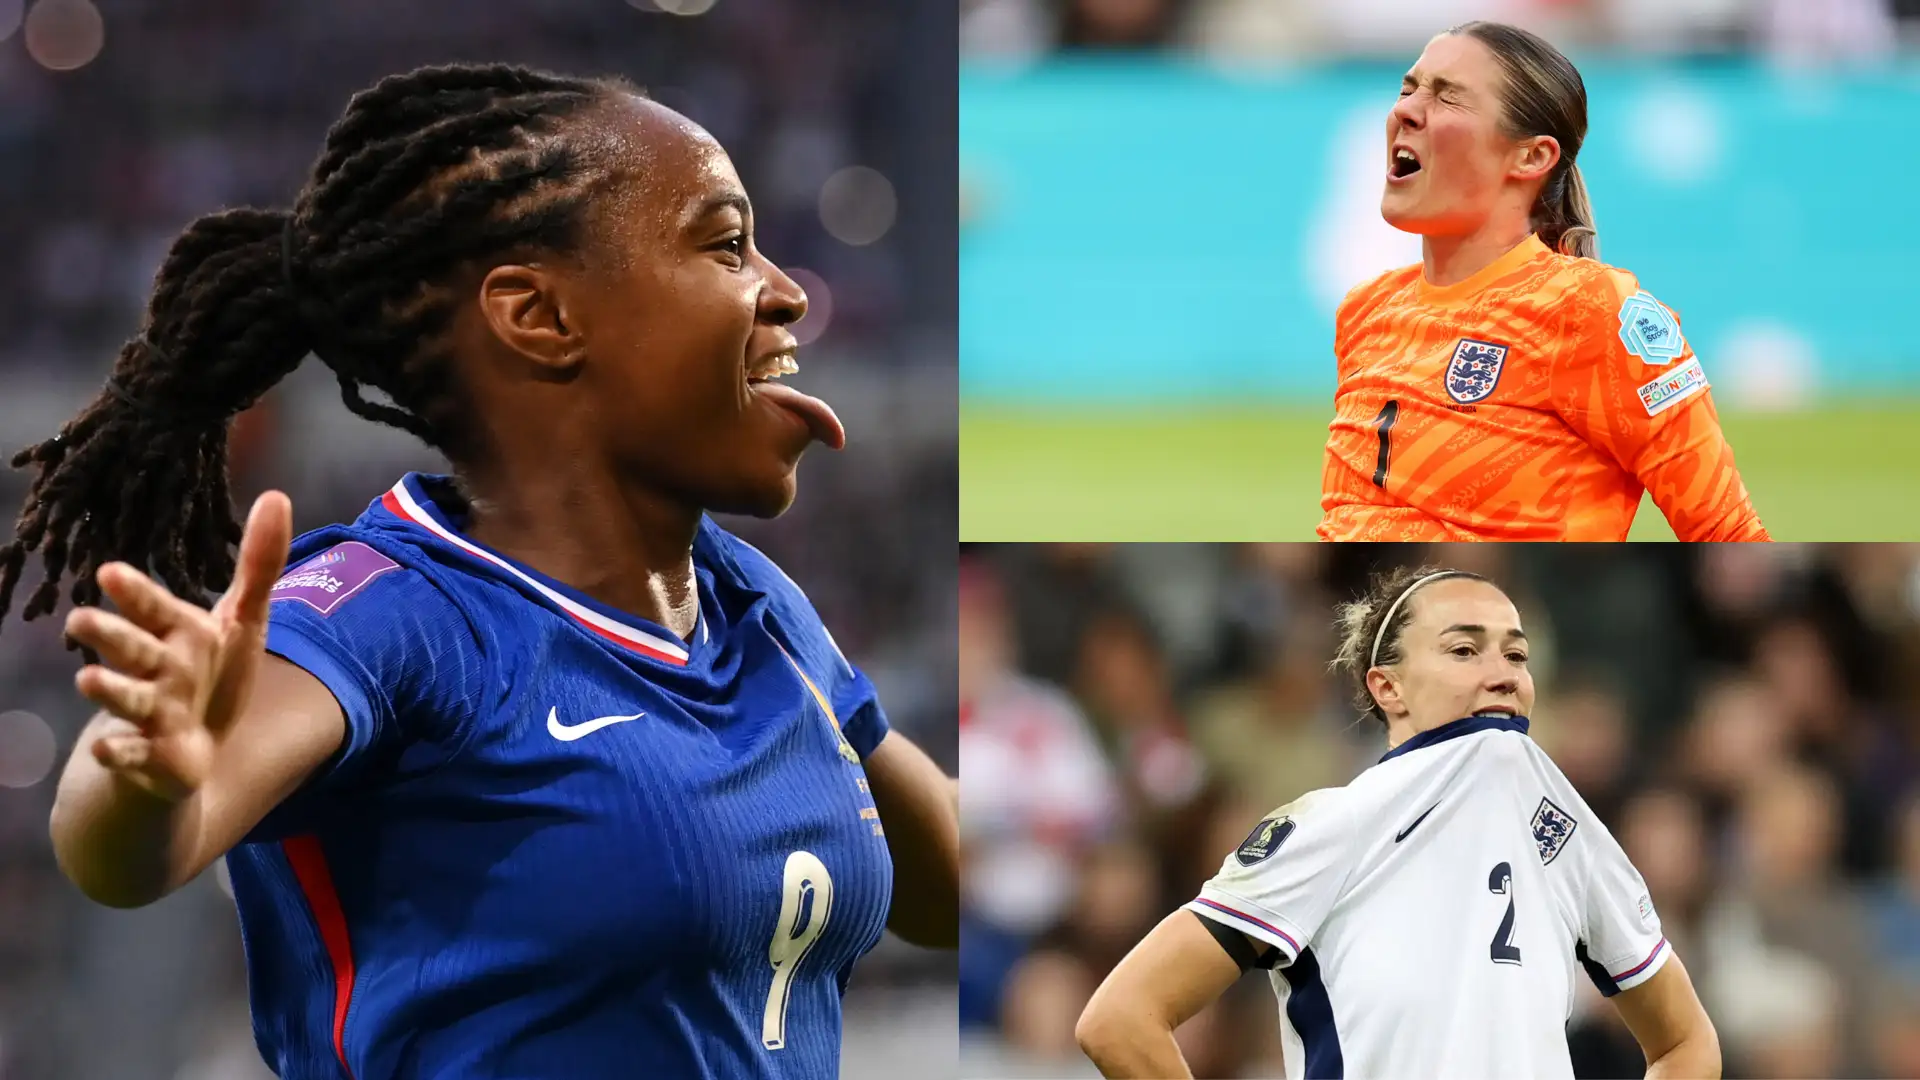 England player ratings vs France: From bad to worse! Mary Earps injury haunts Lionesses as Millie Bright shows rust in Euro 2025 qualifying defeat to Les Bleues